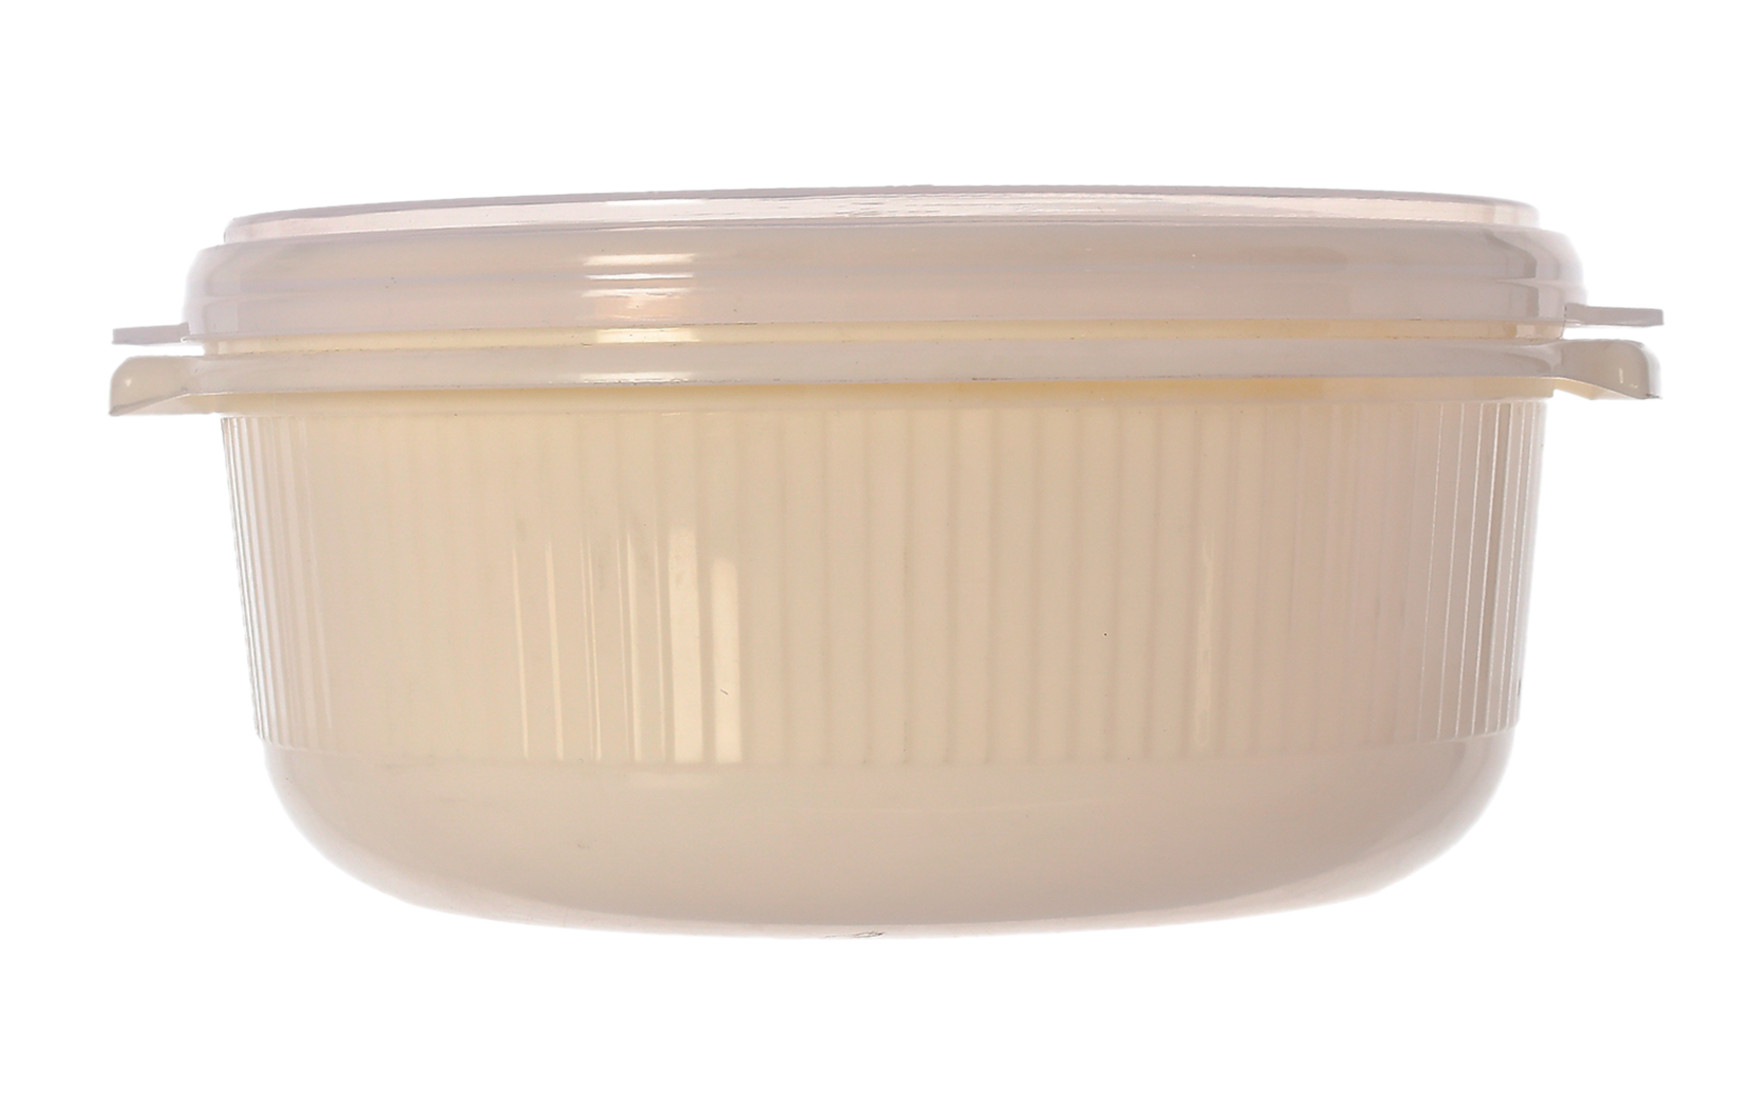 Kuber Industries 3 Piece Multiuses Plastic Serving/Mixing Bowls, Food Storage Containers Set With Lid, (3200ml, 1800ml, 1000ml) (Cream)-46KM0317